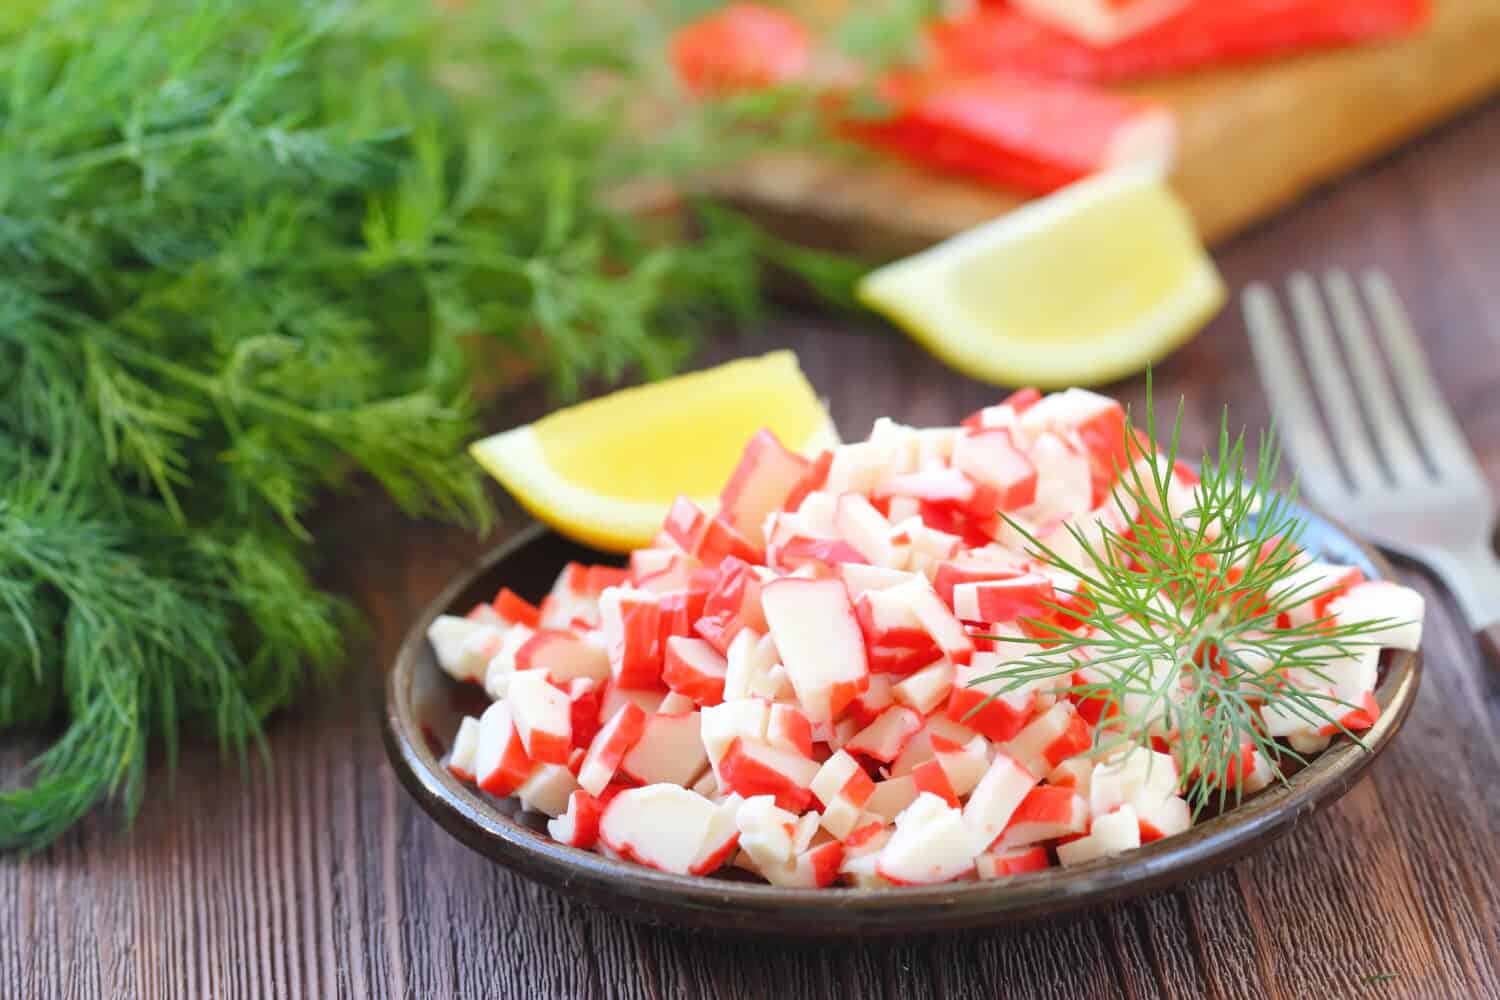 Delicious salad with crab sticks prepared for eating